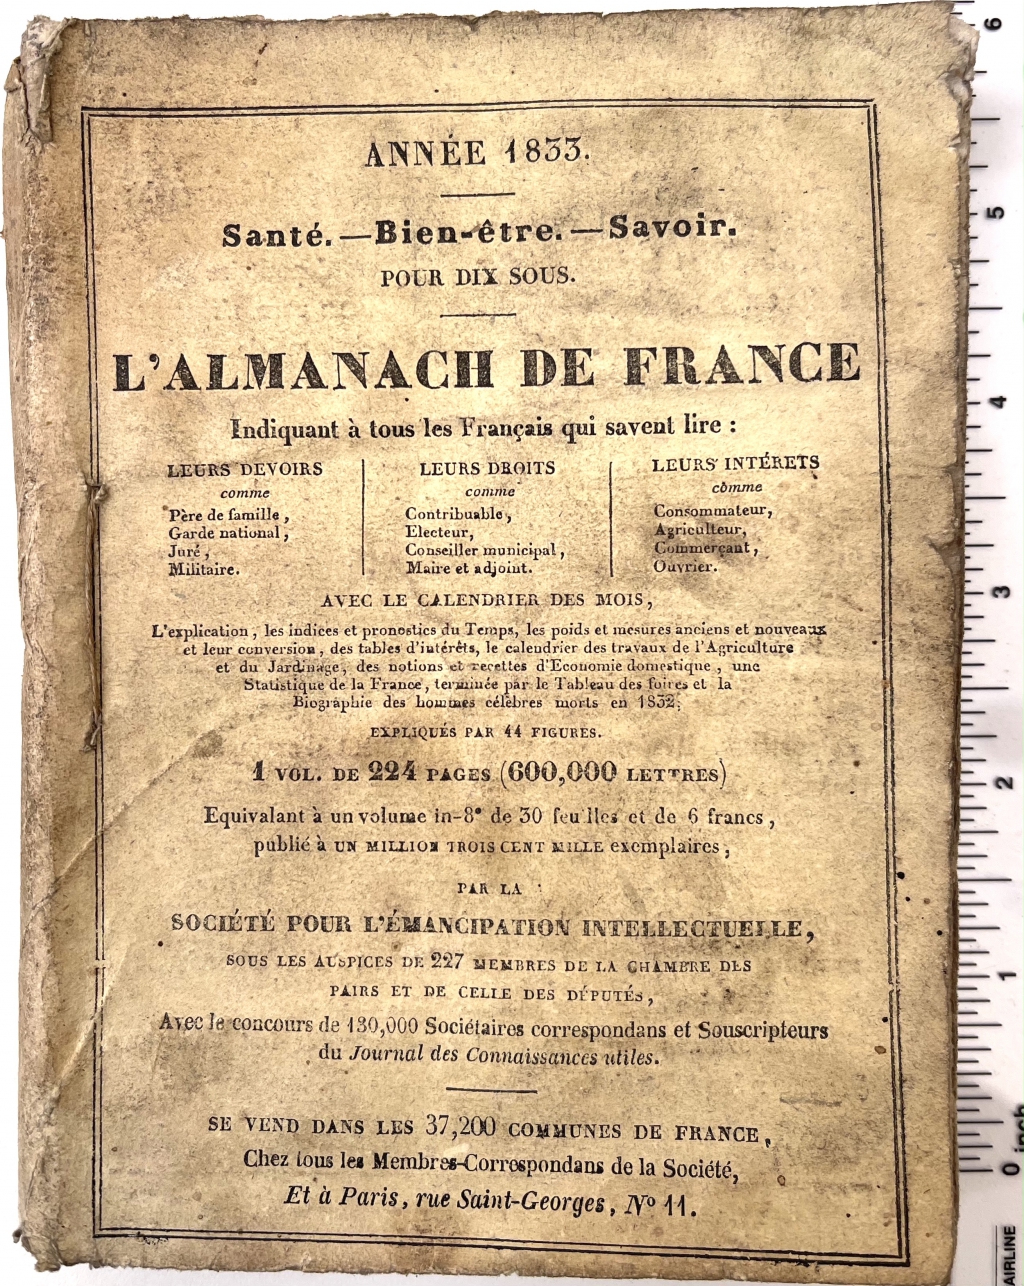 Upper printed wrapper of the first edition of L'Almanach de France, claiming to have been issued in an edition of 1,300,000 copies.